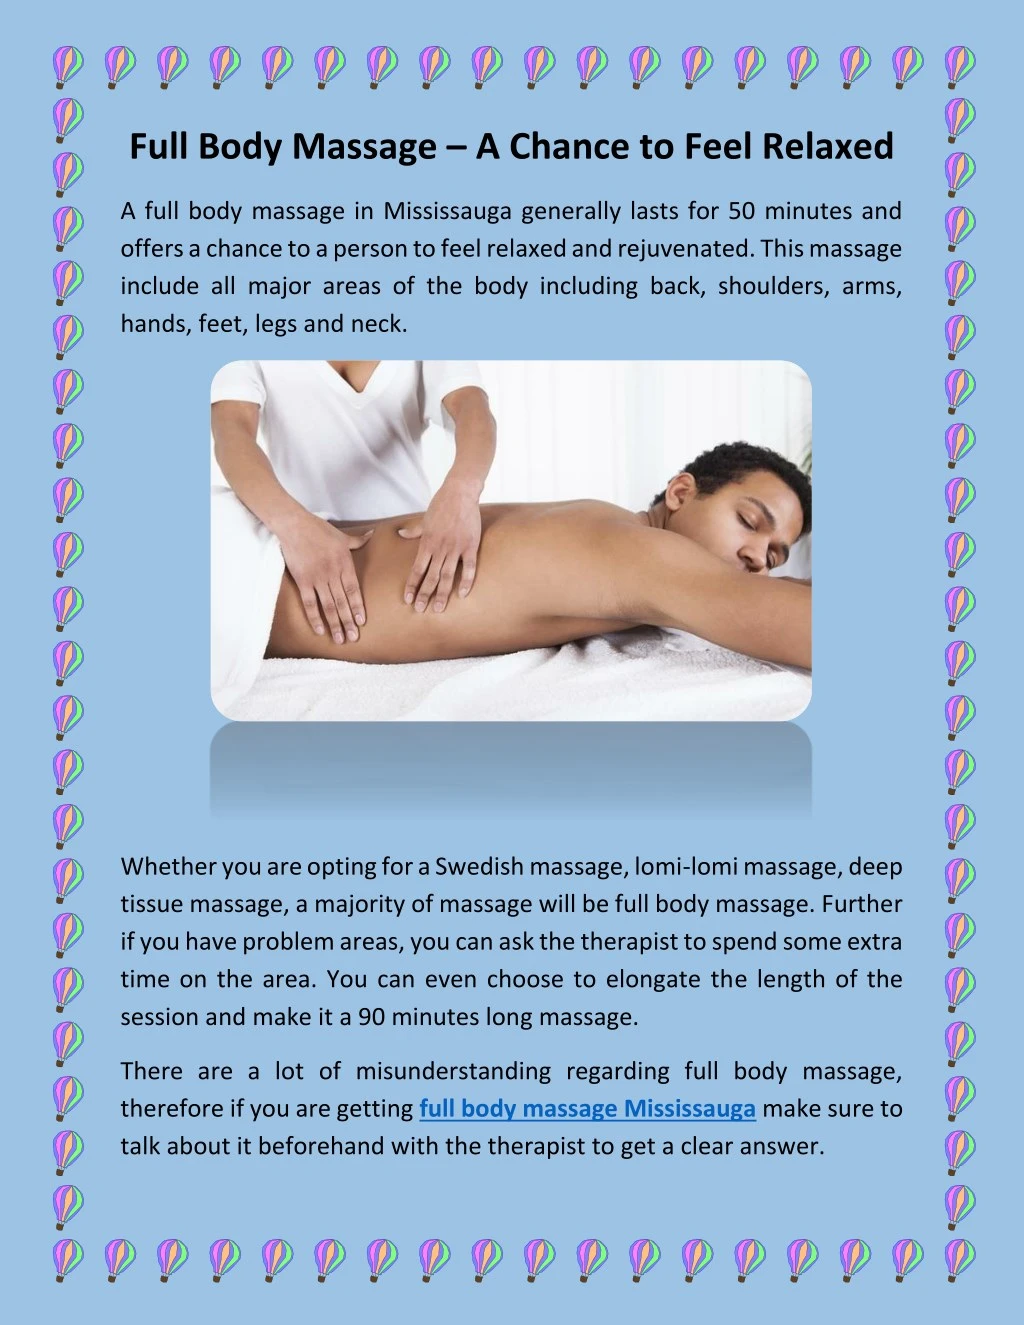 full body massage a chance to feel relaxed